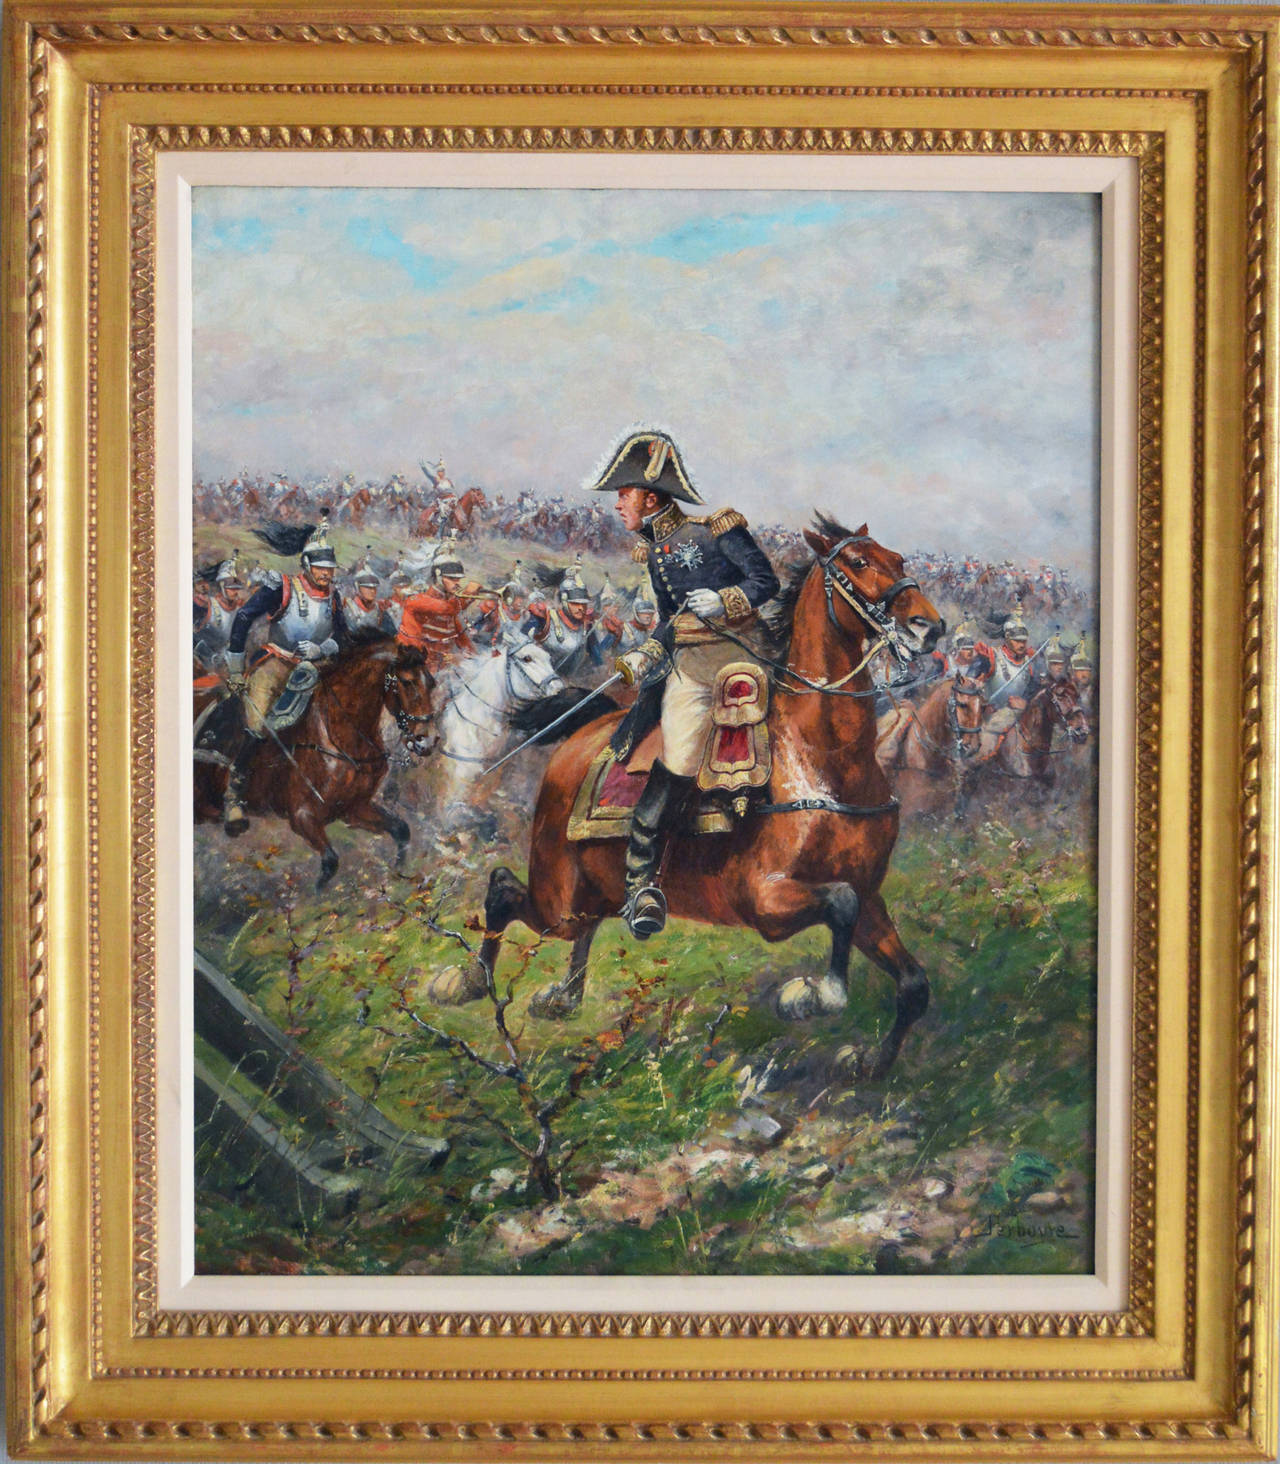 Paul Emile Léon Perboyre Landscape Painting - General Leading a Charge of the French Cuirassiers at Waterloo, oil on canvas